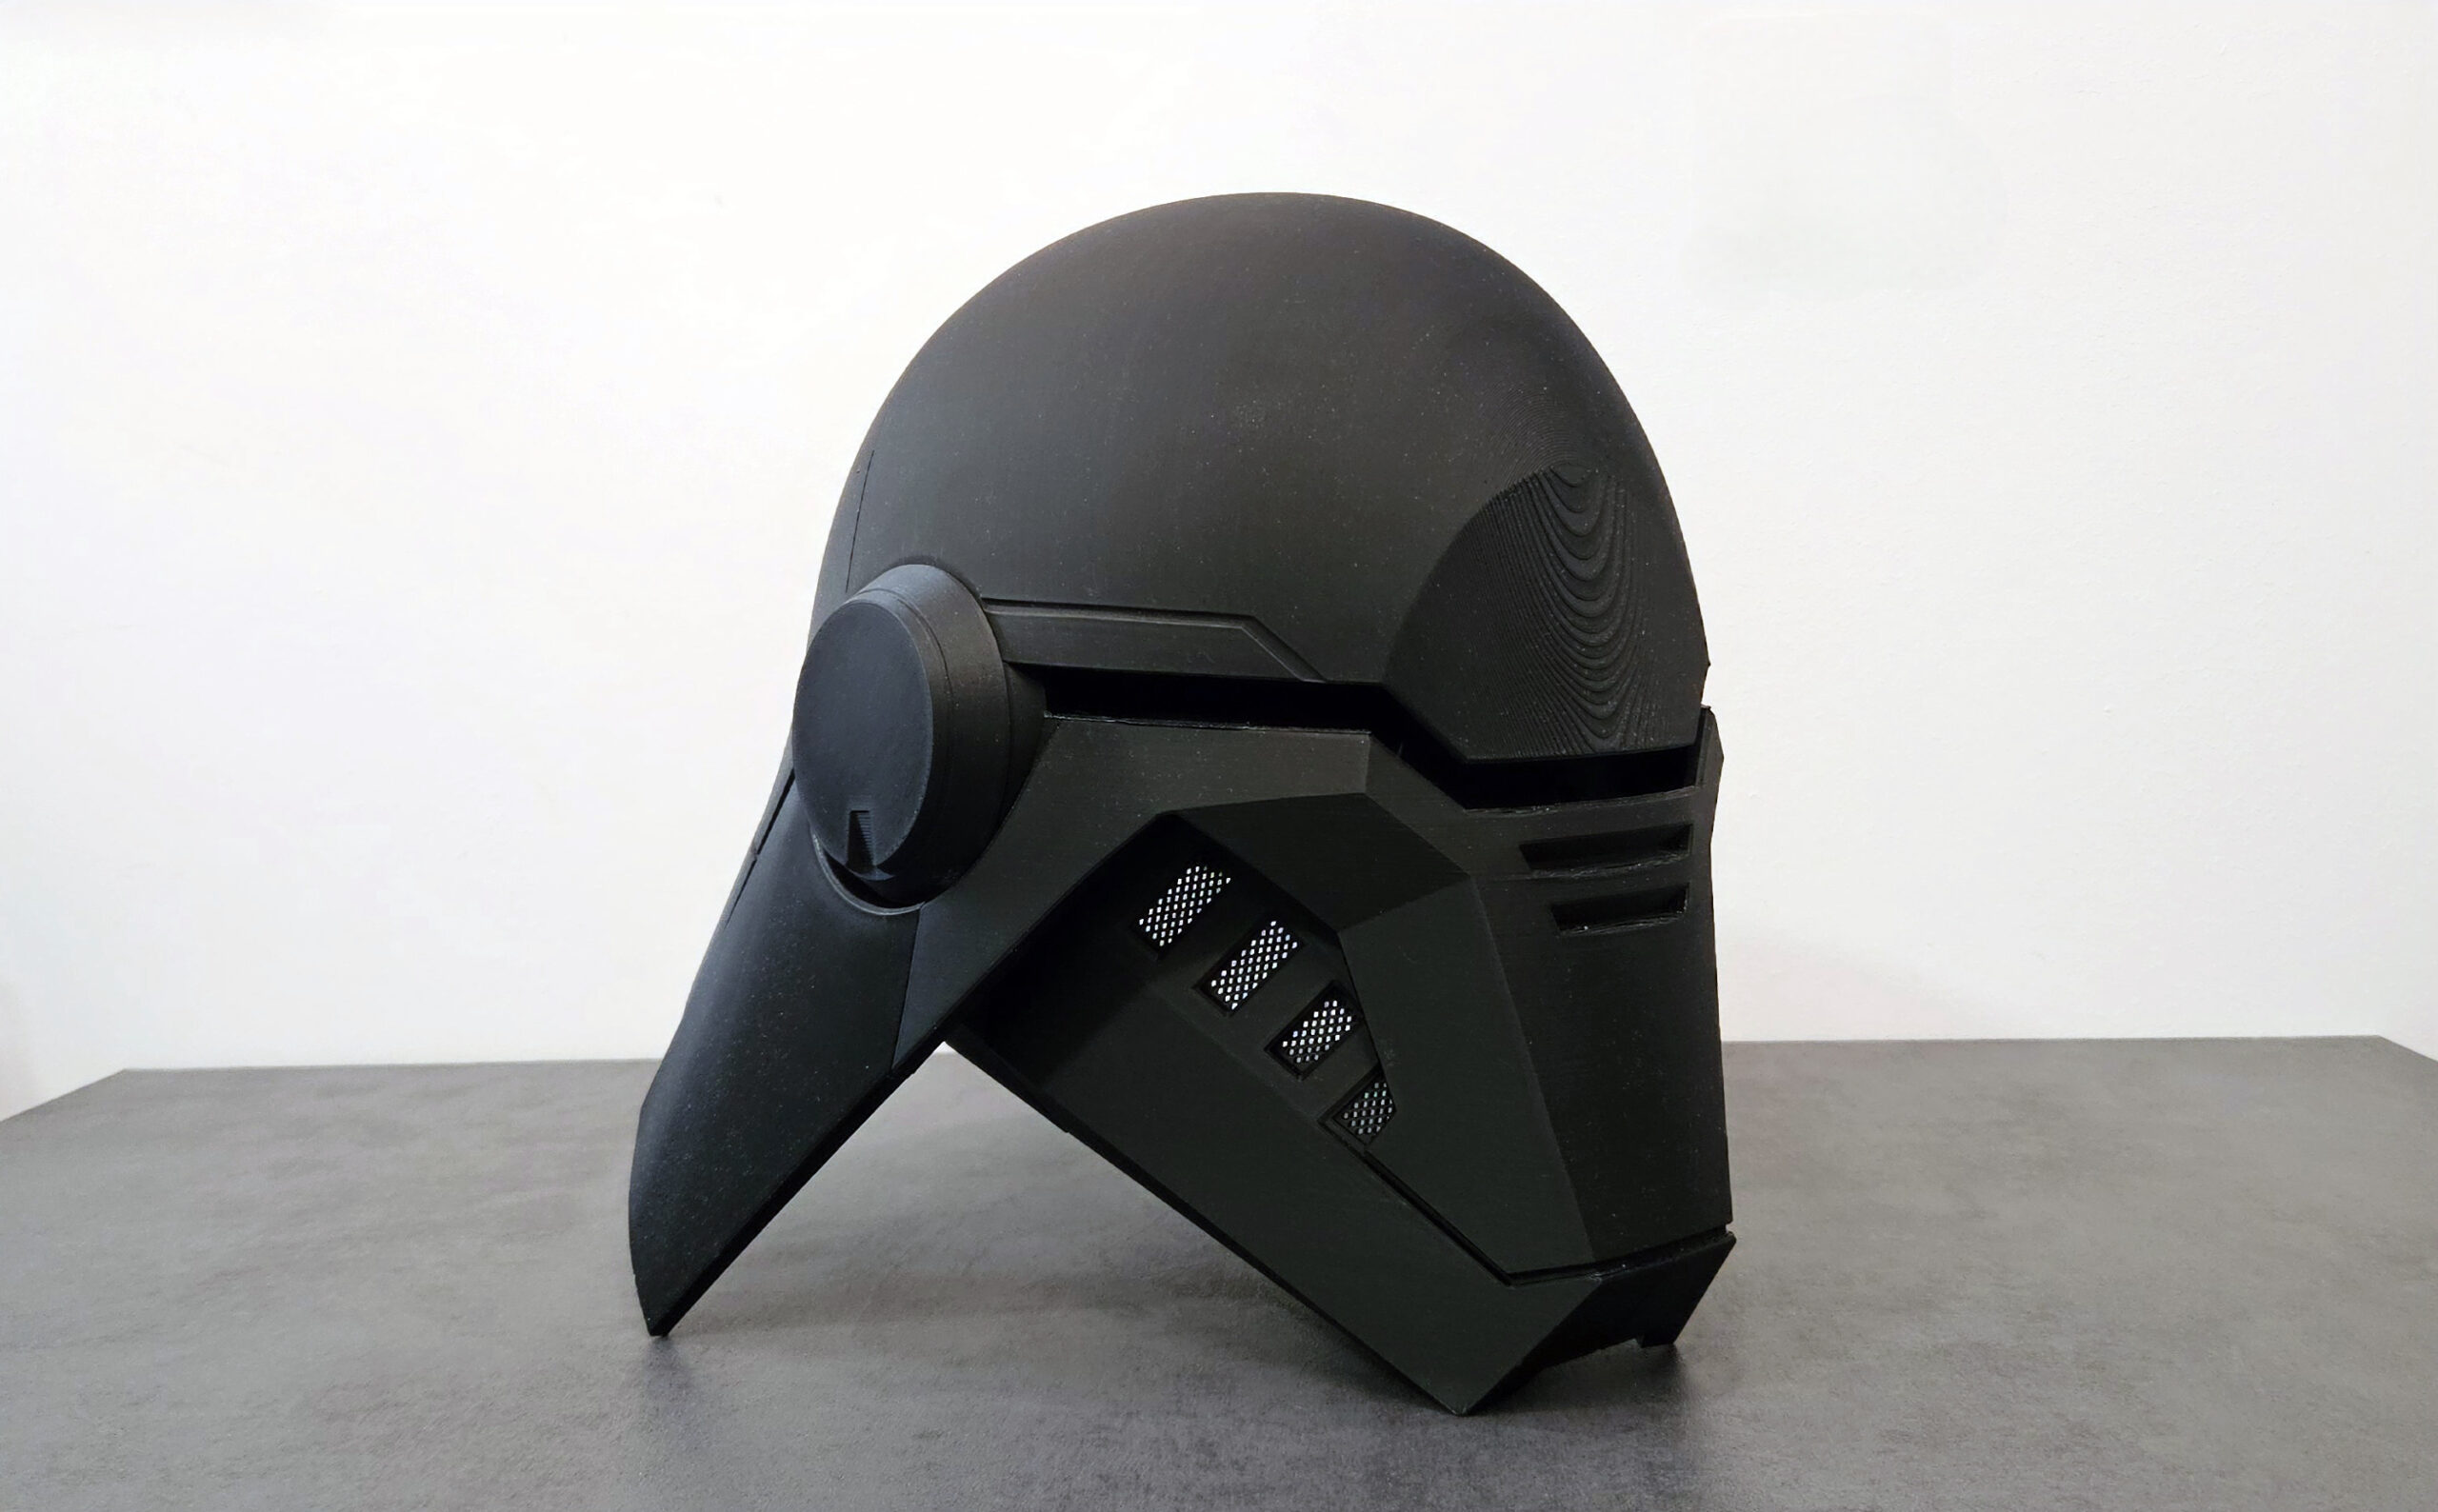 second sister helmet made by mystery makers